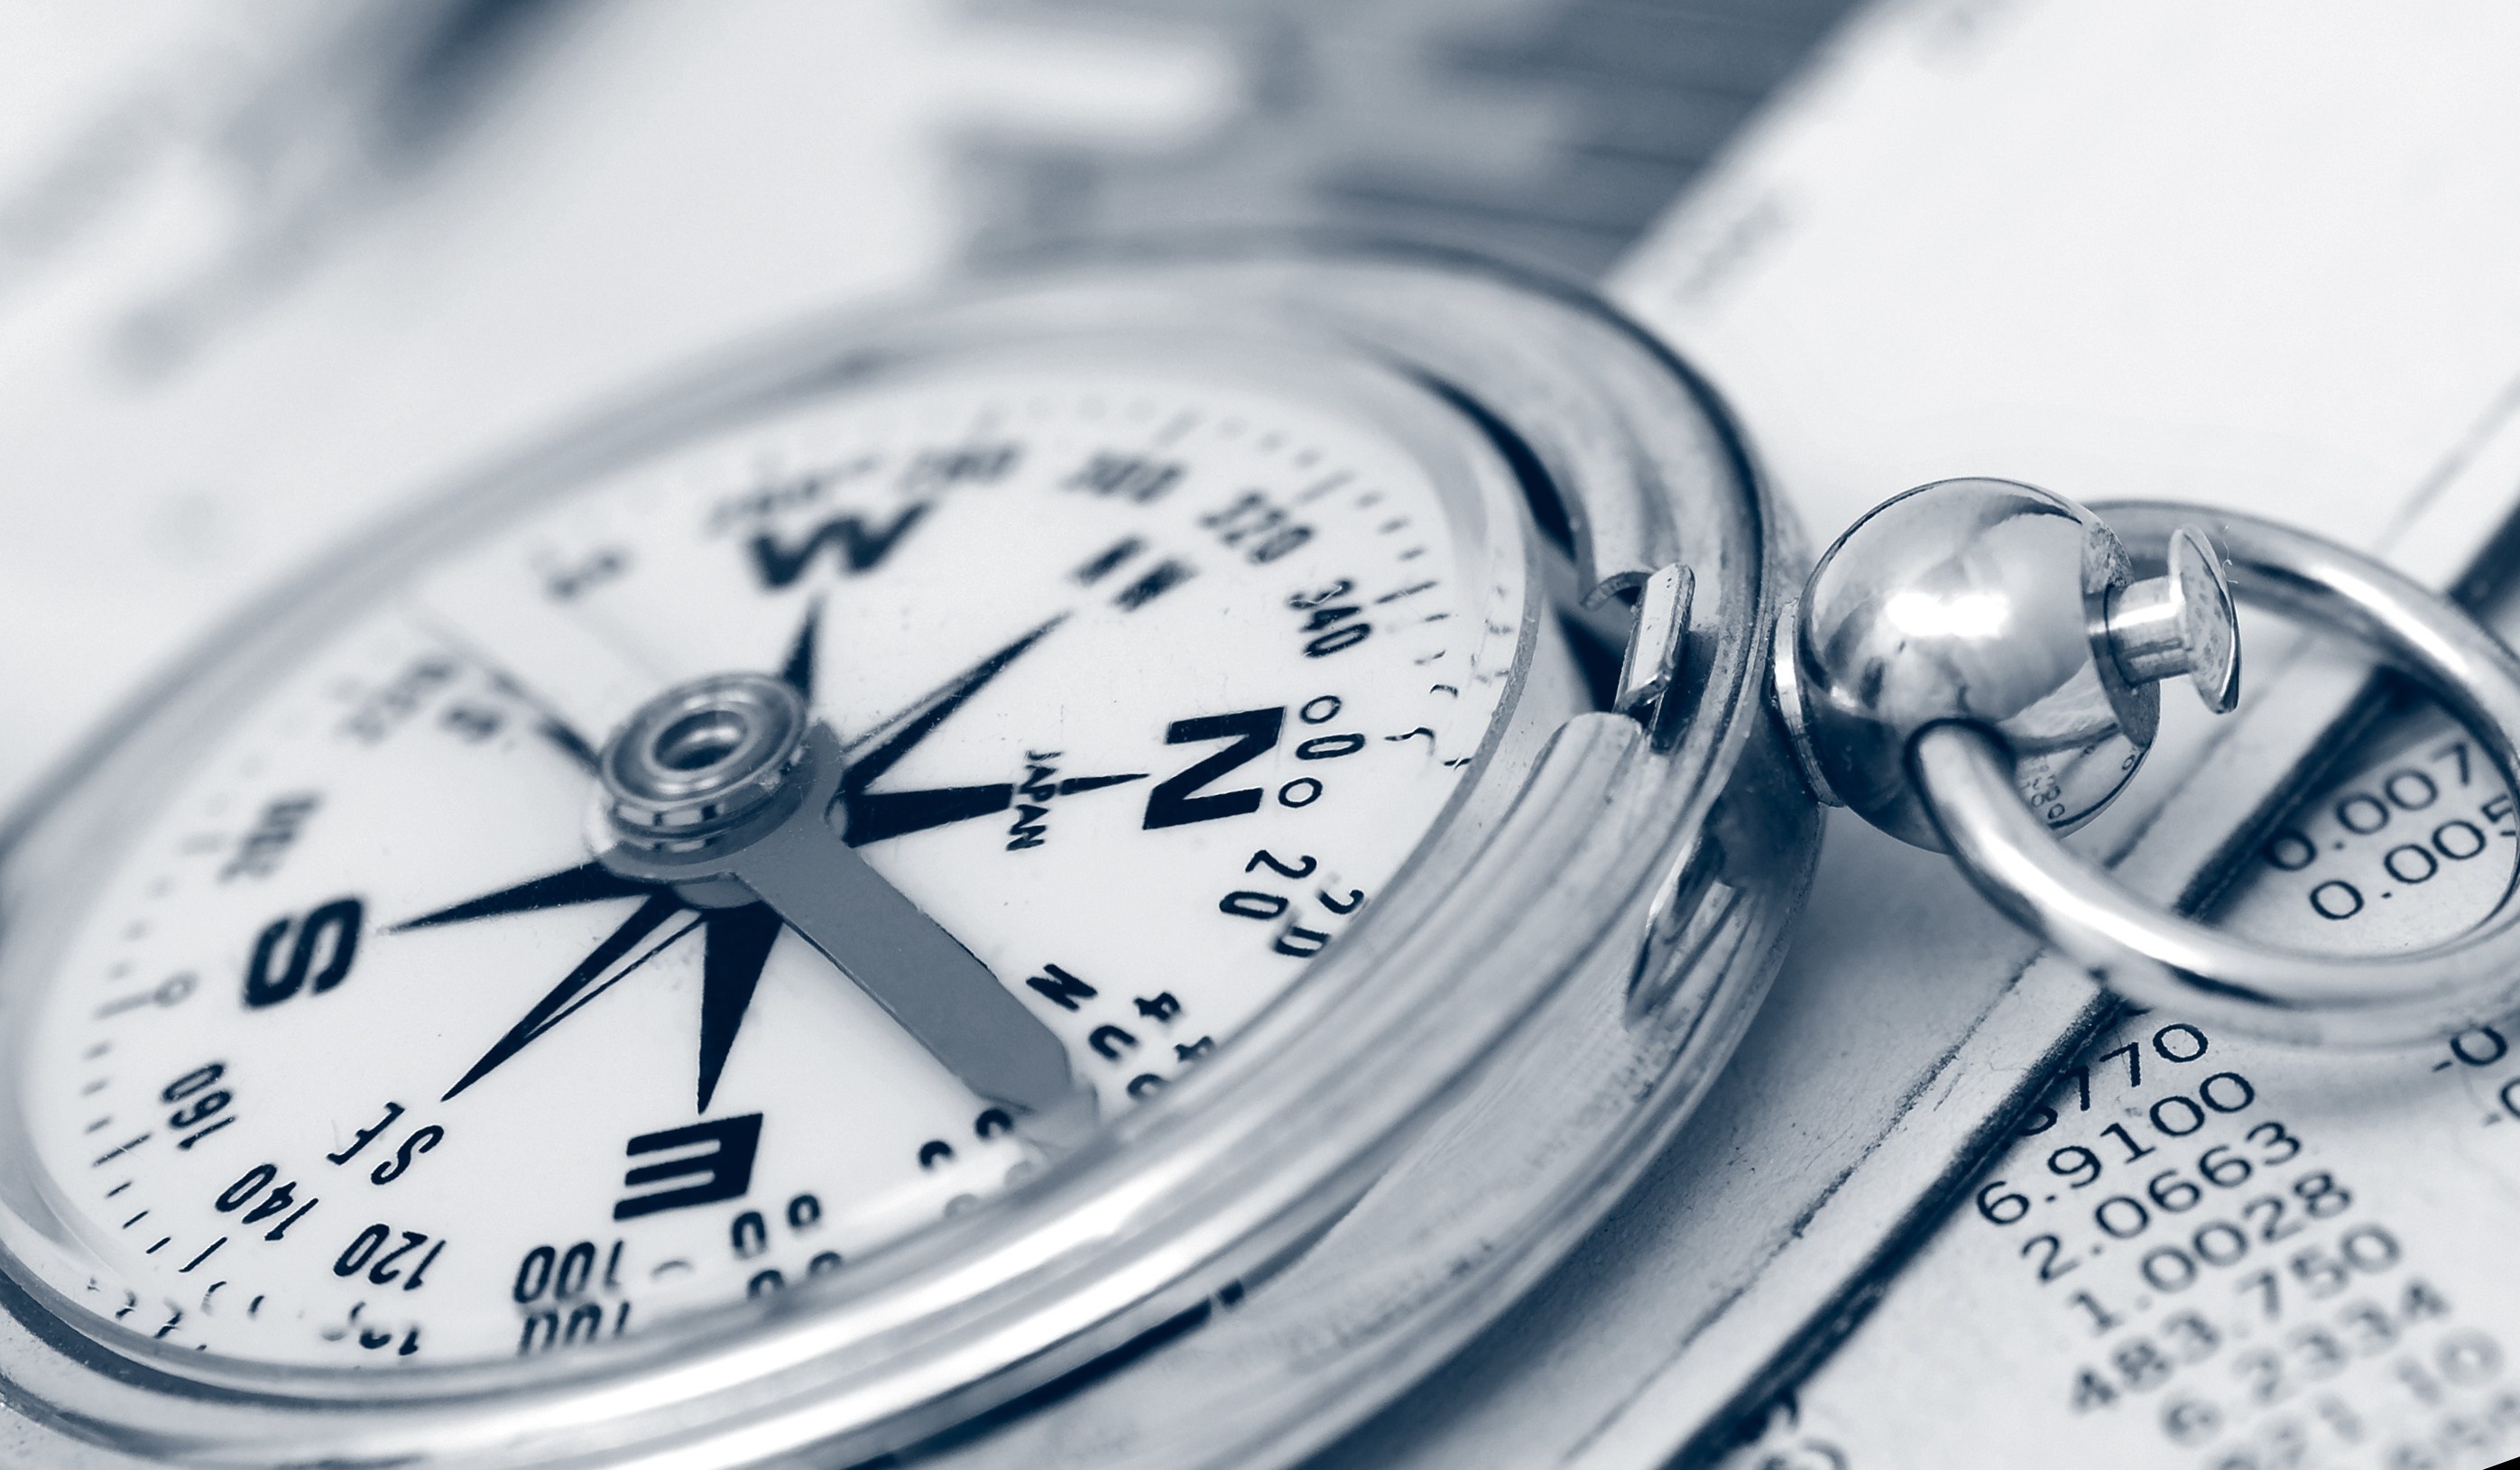 Metal compass, Monochrome photography, Close-up view, Black and white, 2800x1630 HD Desktop